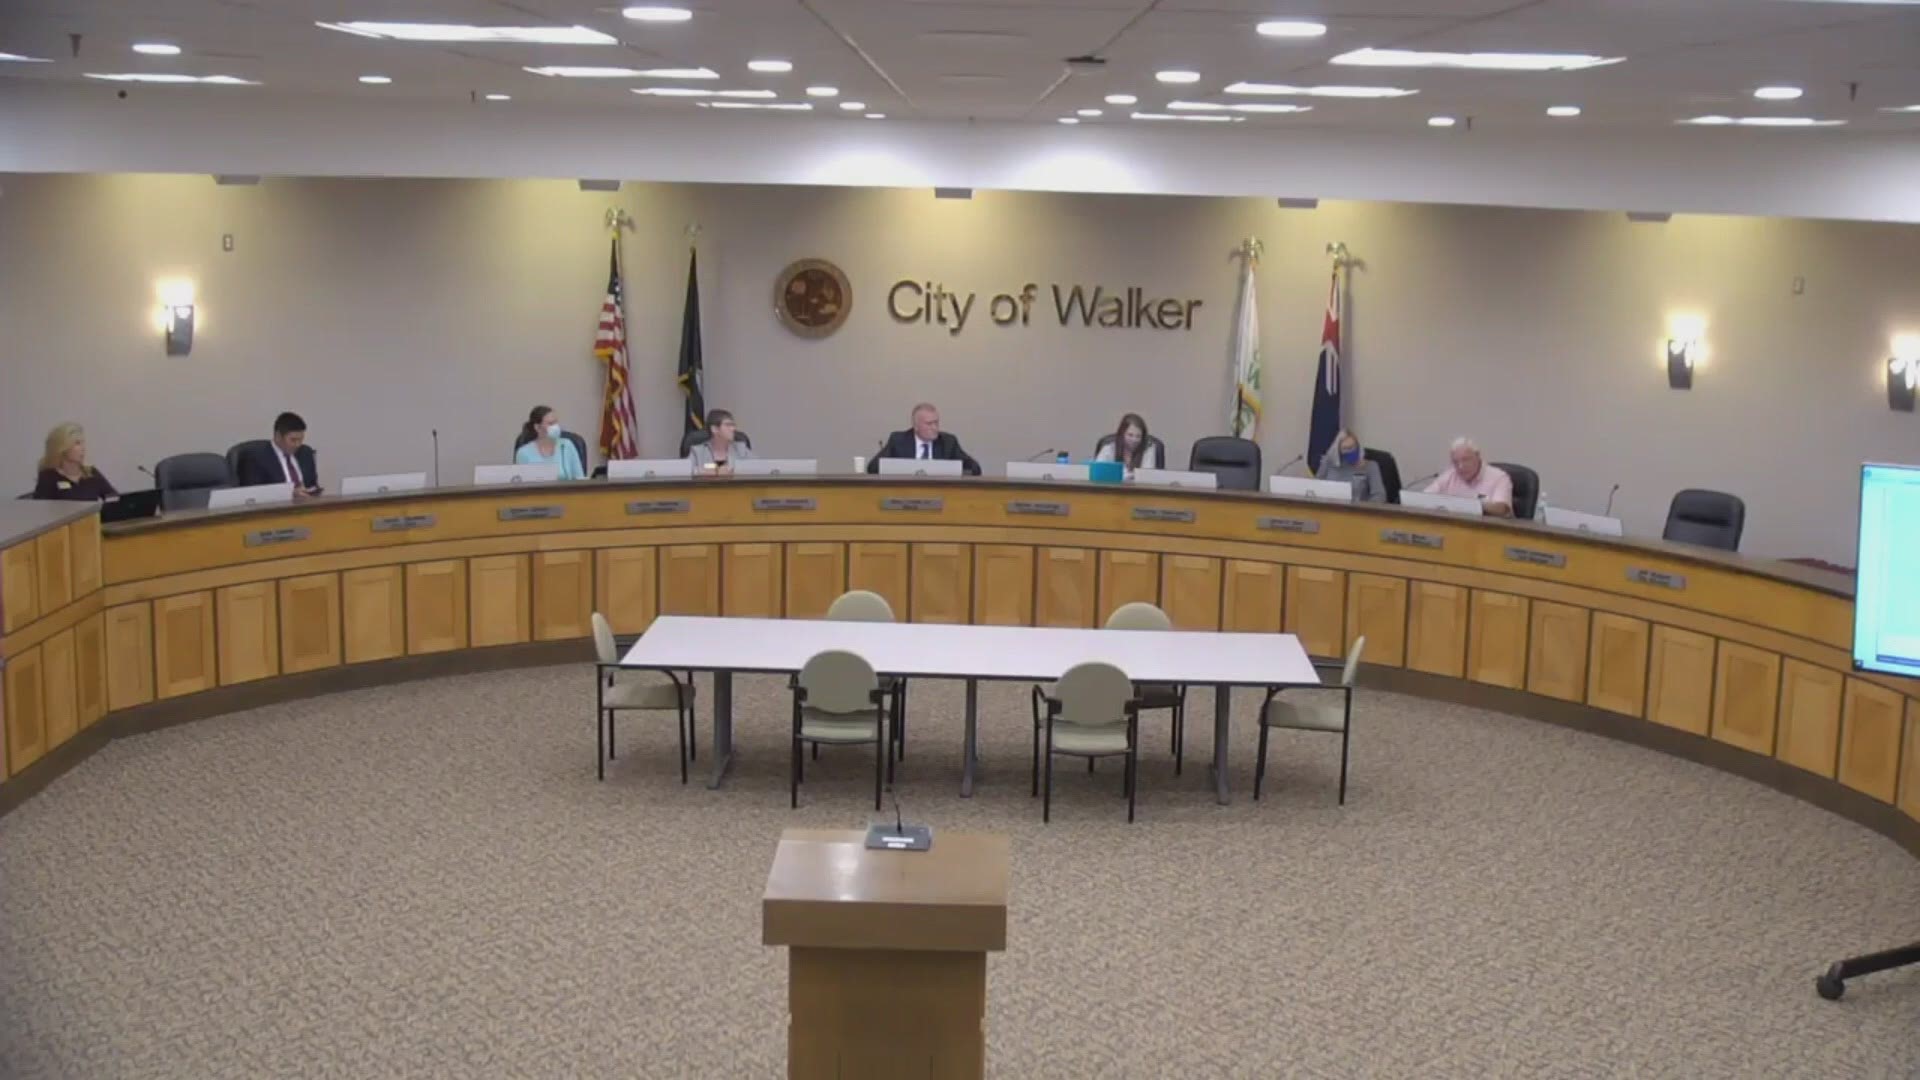 A dispute between a city commissioner and the mayor was on display at Monday's commission meeting.